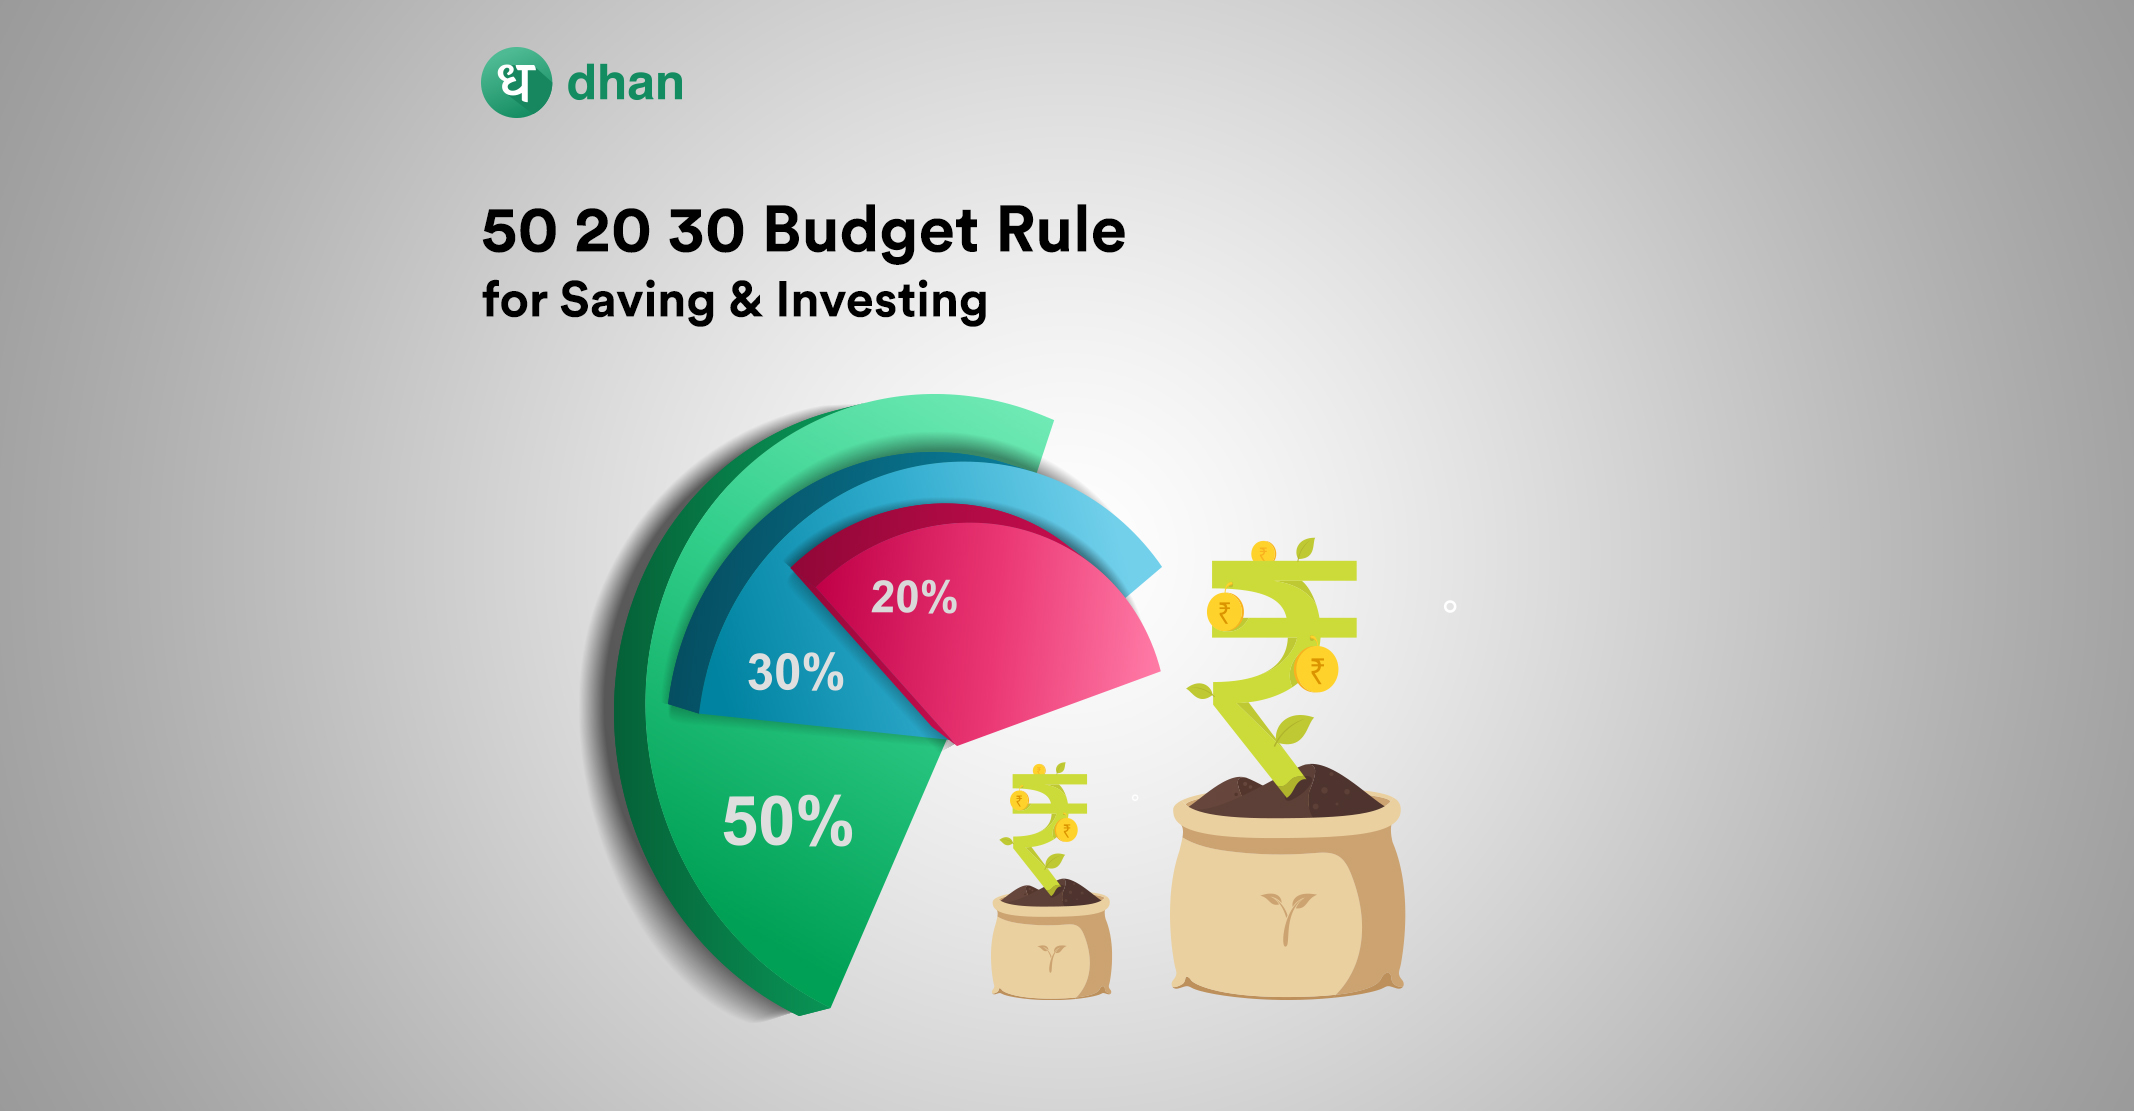 50-30-20 Budget Rule for Saving & Investing